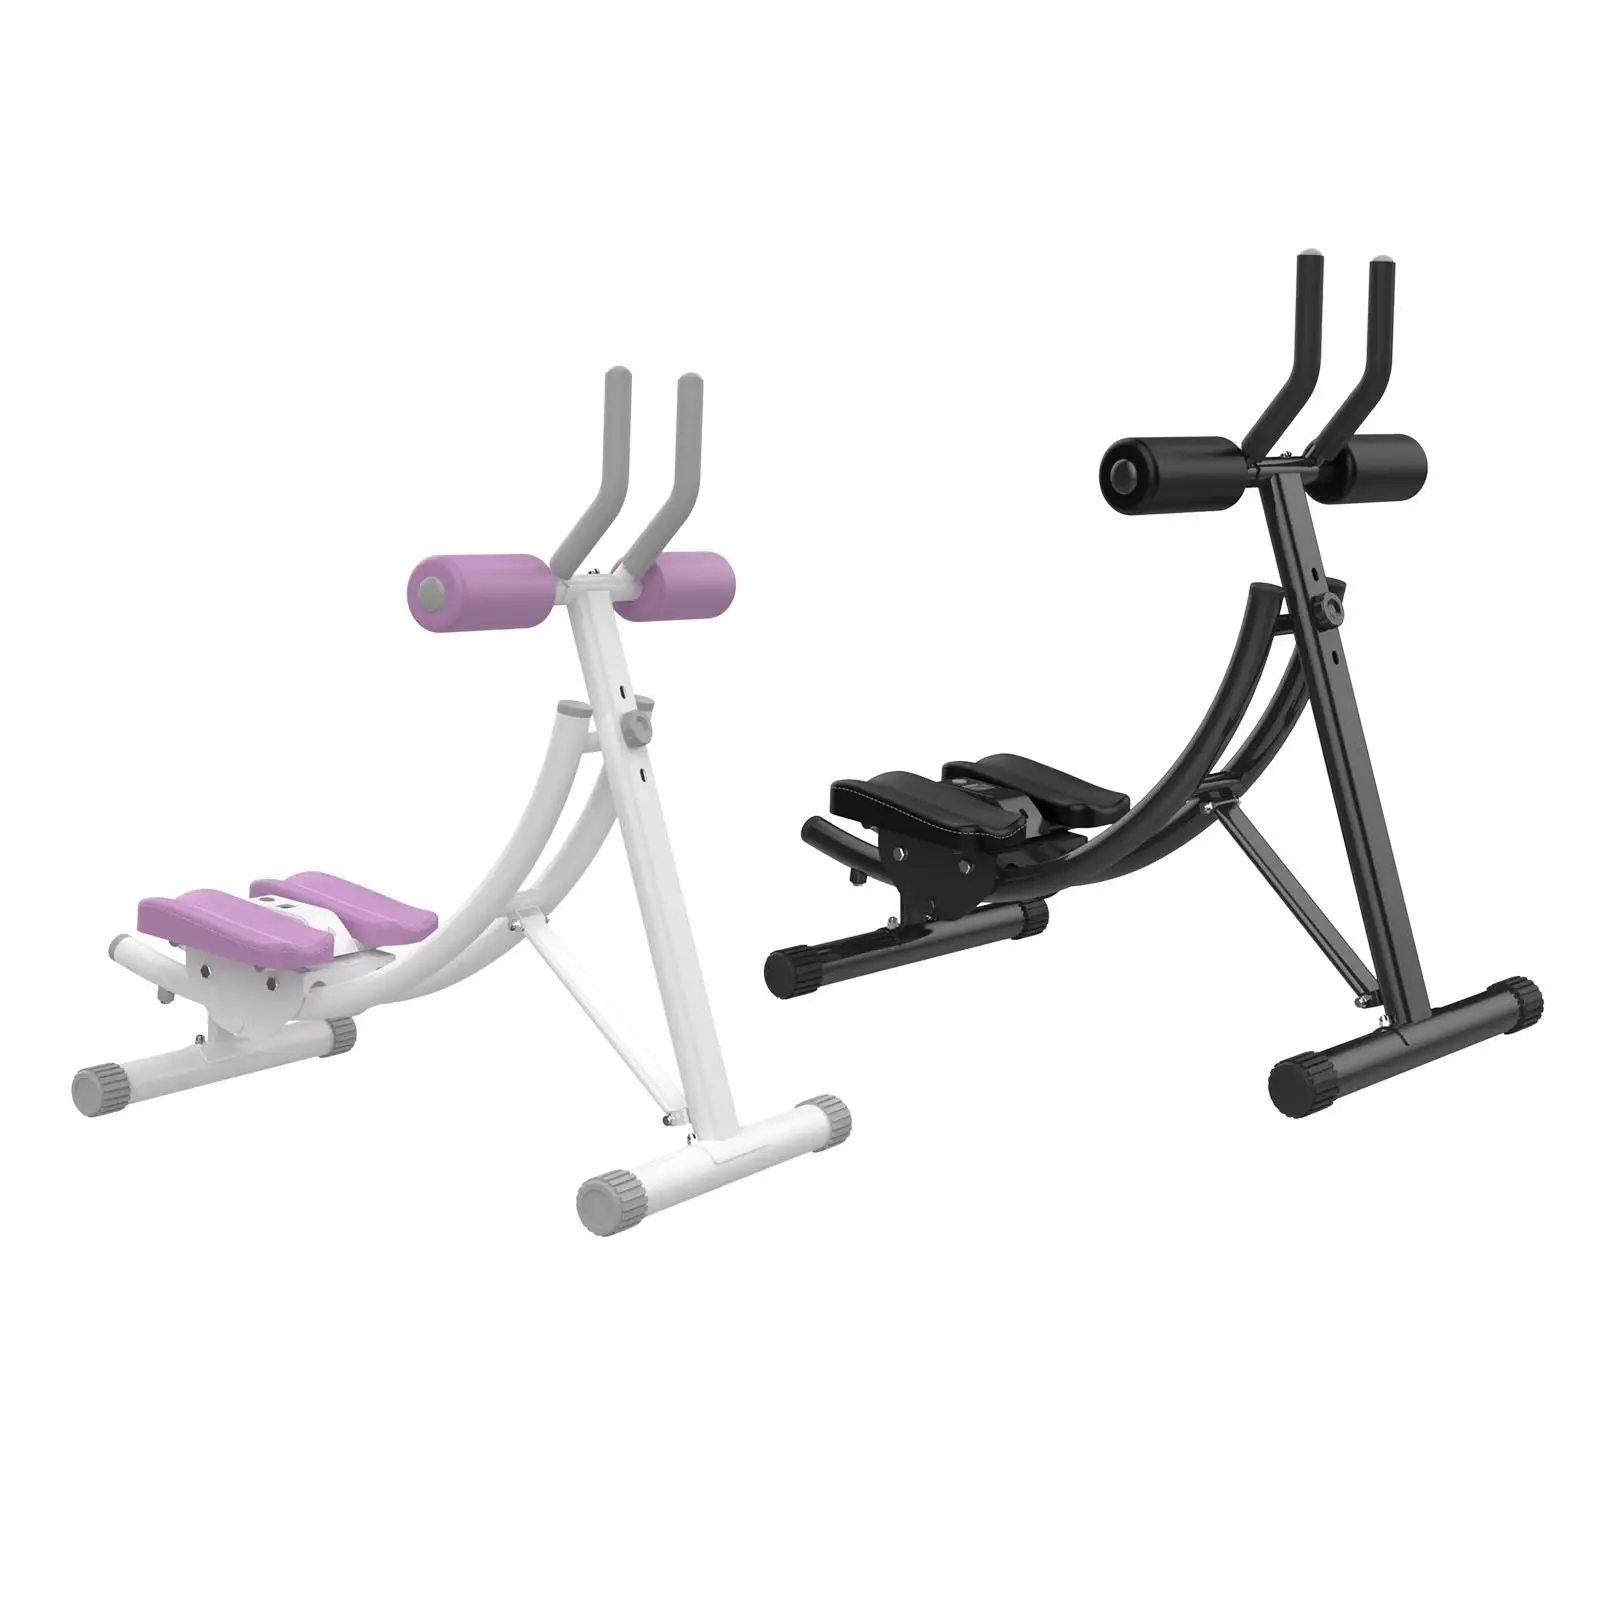 Portable Abdominal Workout Machine with LED Display Home Gym Use Fitness Equipment Body Building Core Abdominal Trainers